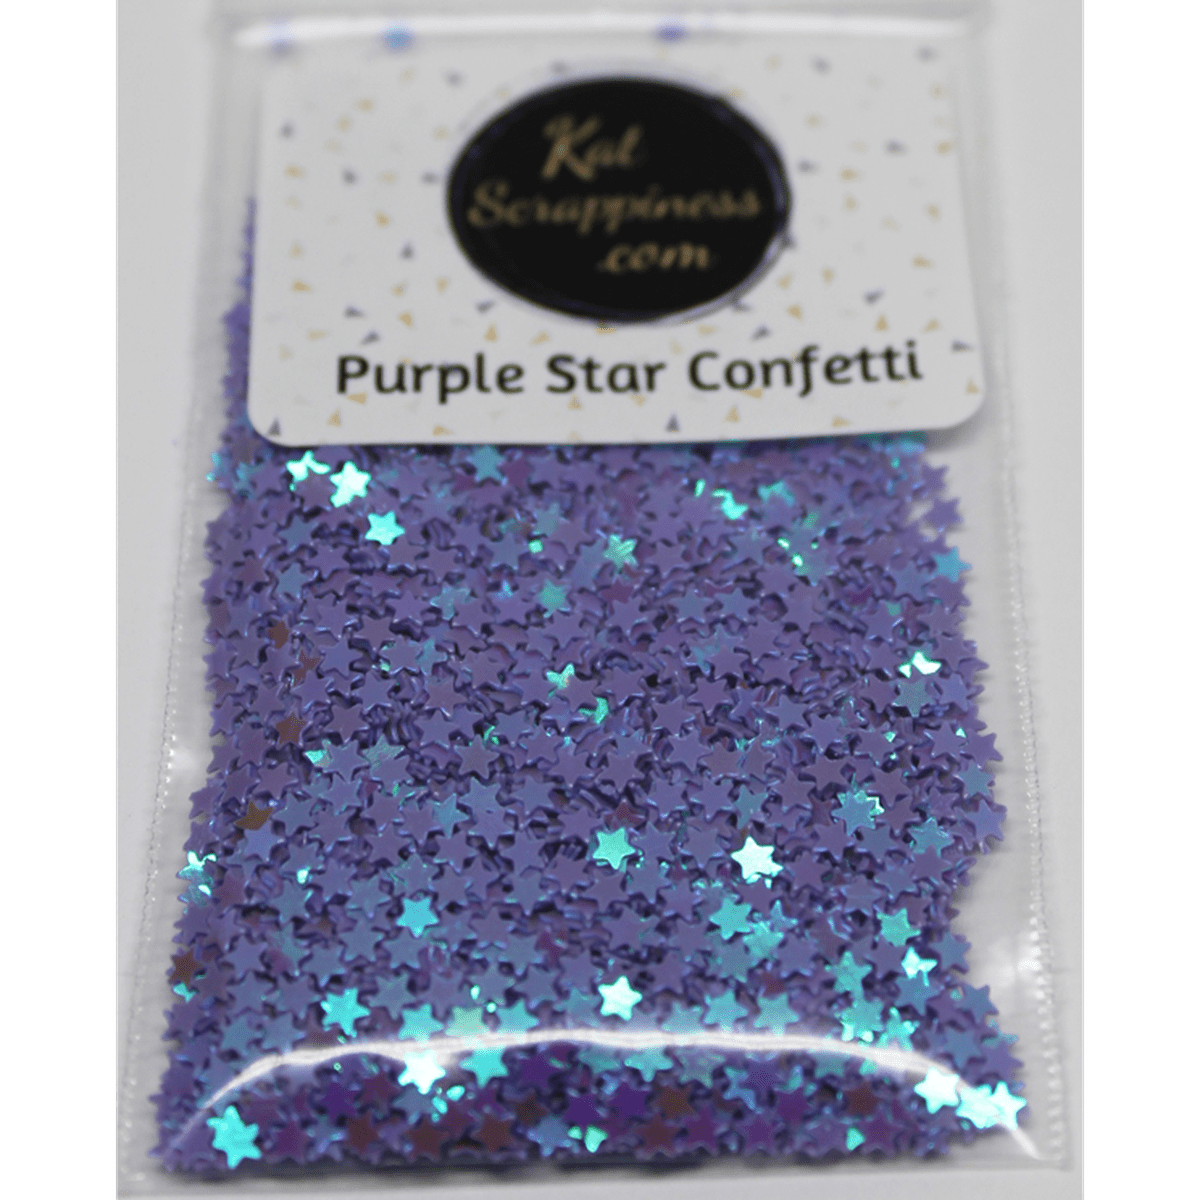 3mm Purple Solid Star Sequins - Kat Scrappiness